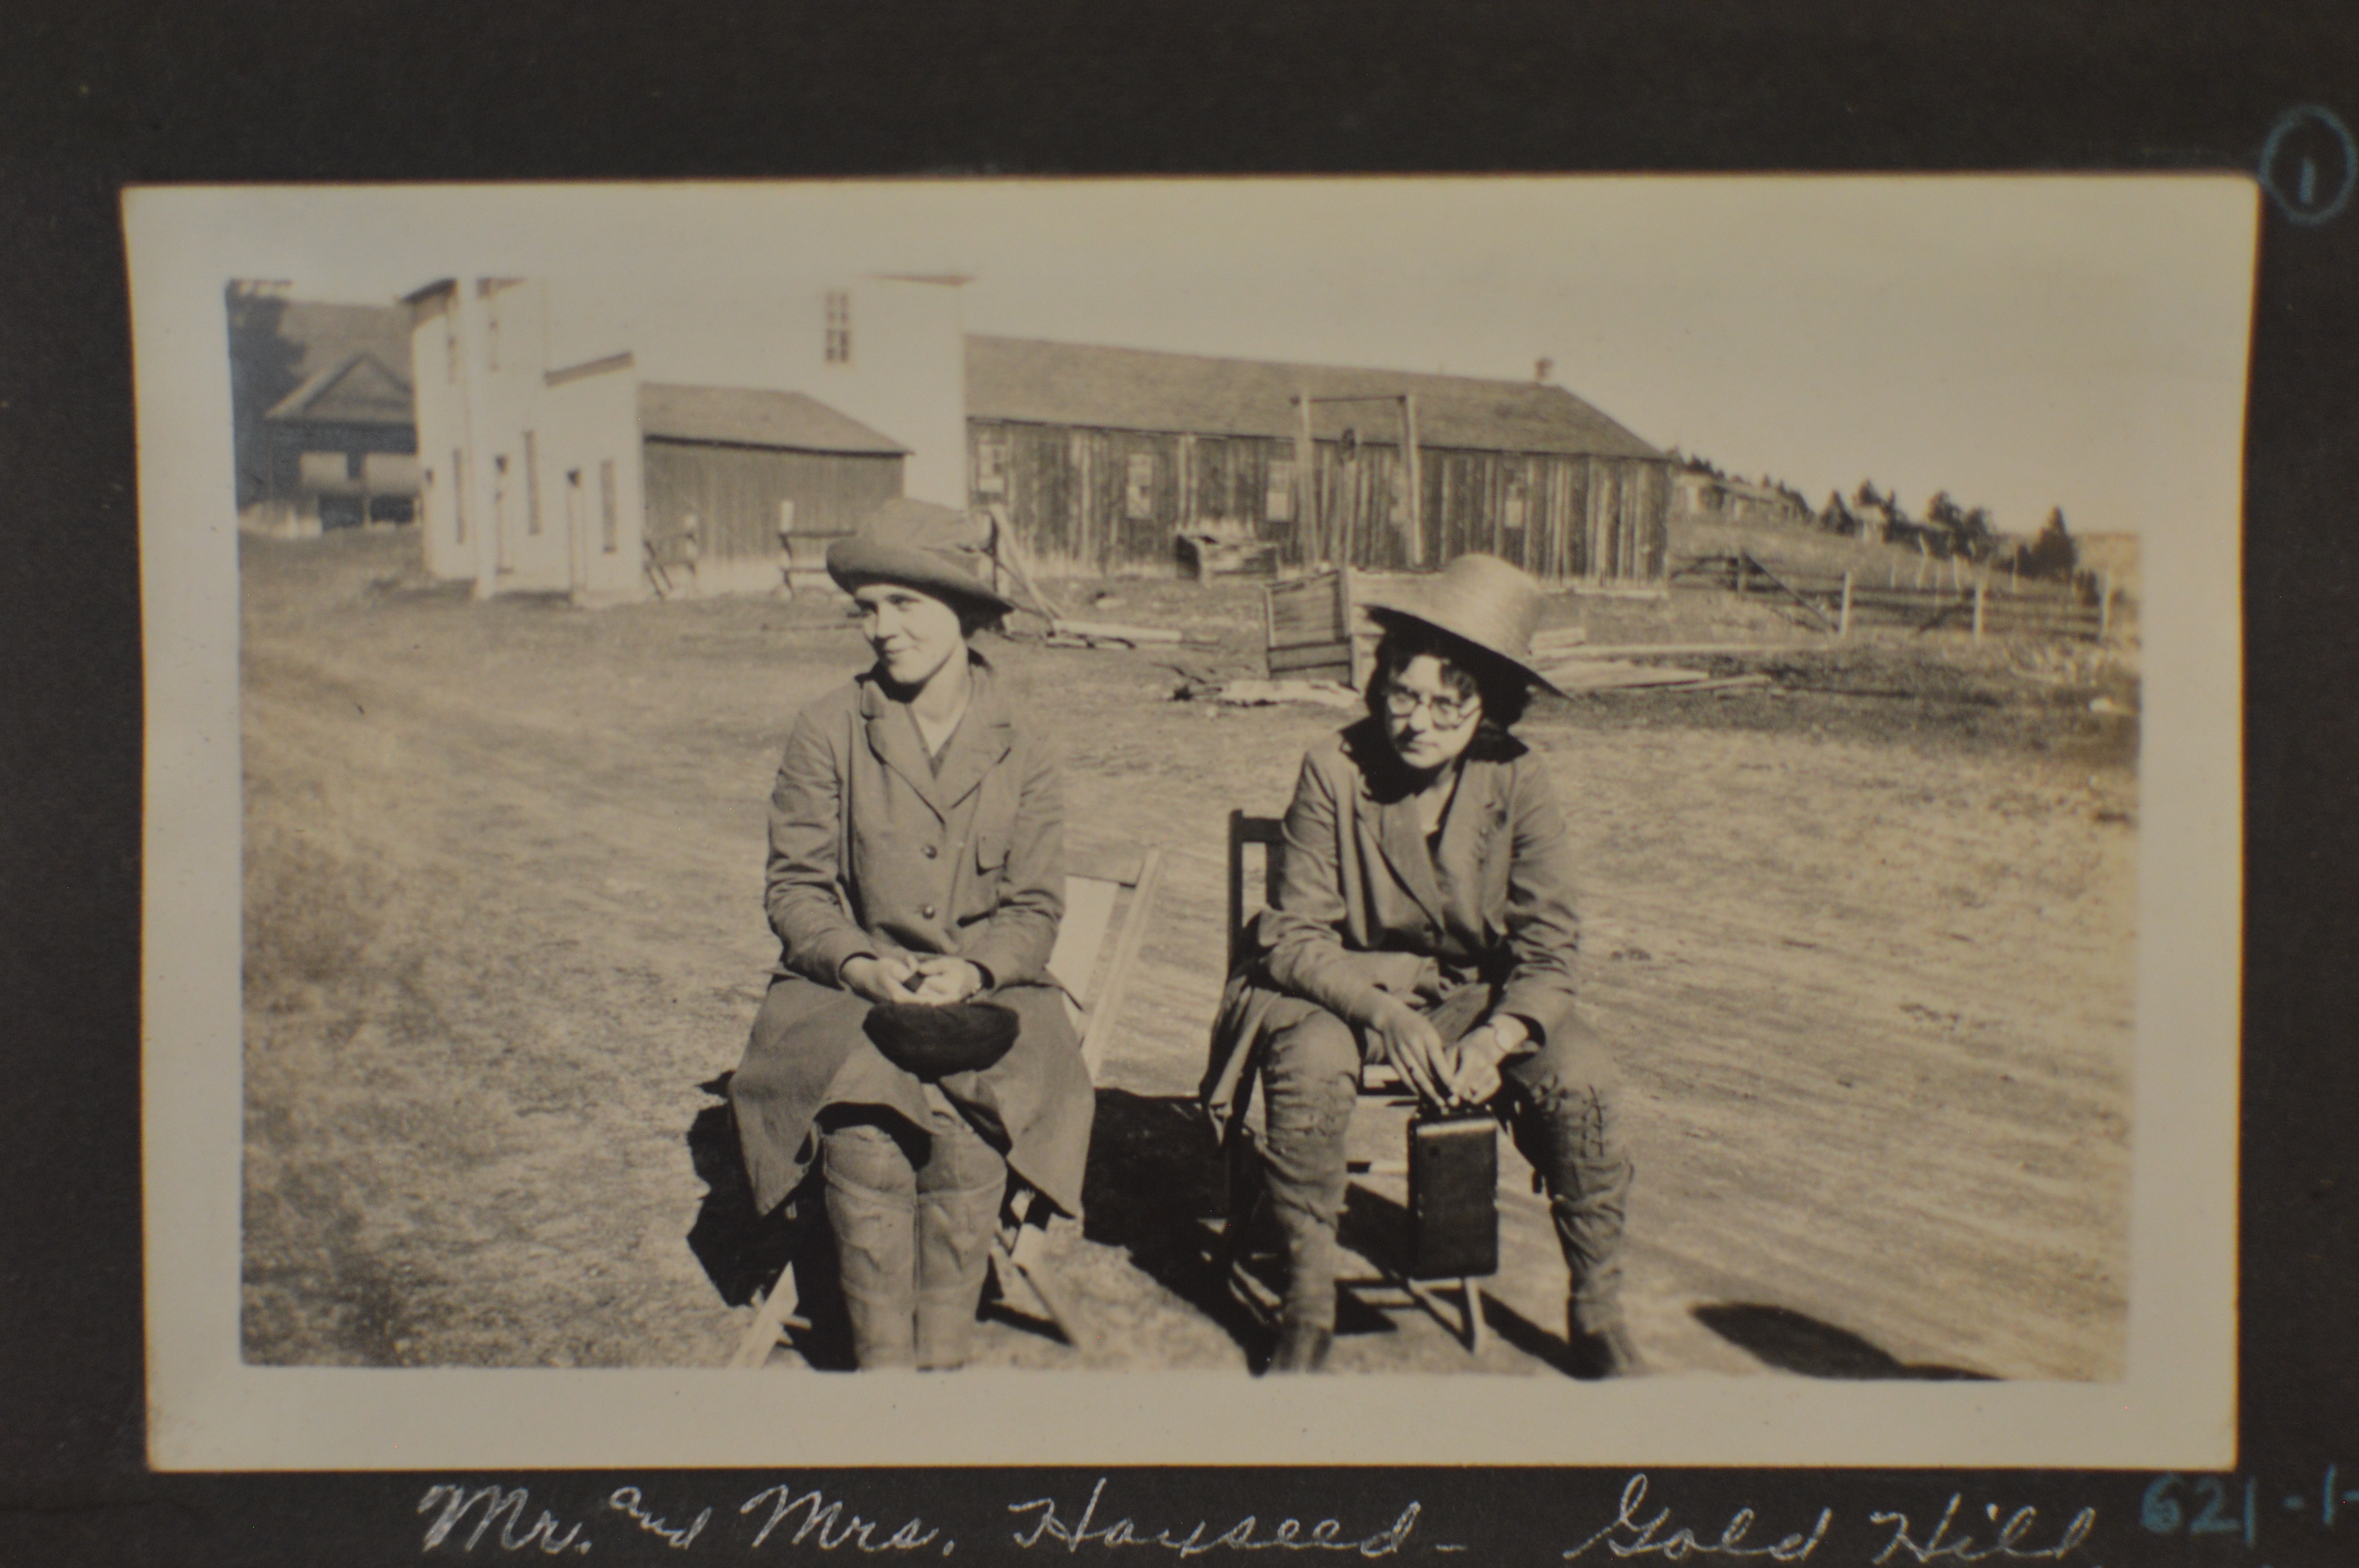 Photo of two women outdoors, dressed in tall boots, long coats, hats. The caption, handwritten at the bottom of the old photograph, says, "Mr. and Mrs. Hayseed--Gold Hill." The young women are sitting on folding chairs; the woman on the left holds a handbag on her lap and smiles at the photographer. The woman on the right is dressed in a more masculine style of clothes for the day, including trousers and a unisex-style hat. She is looking directly at the camera, with a slightly more serious expression.